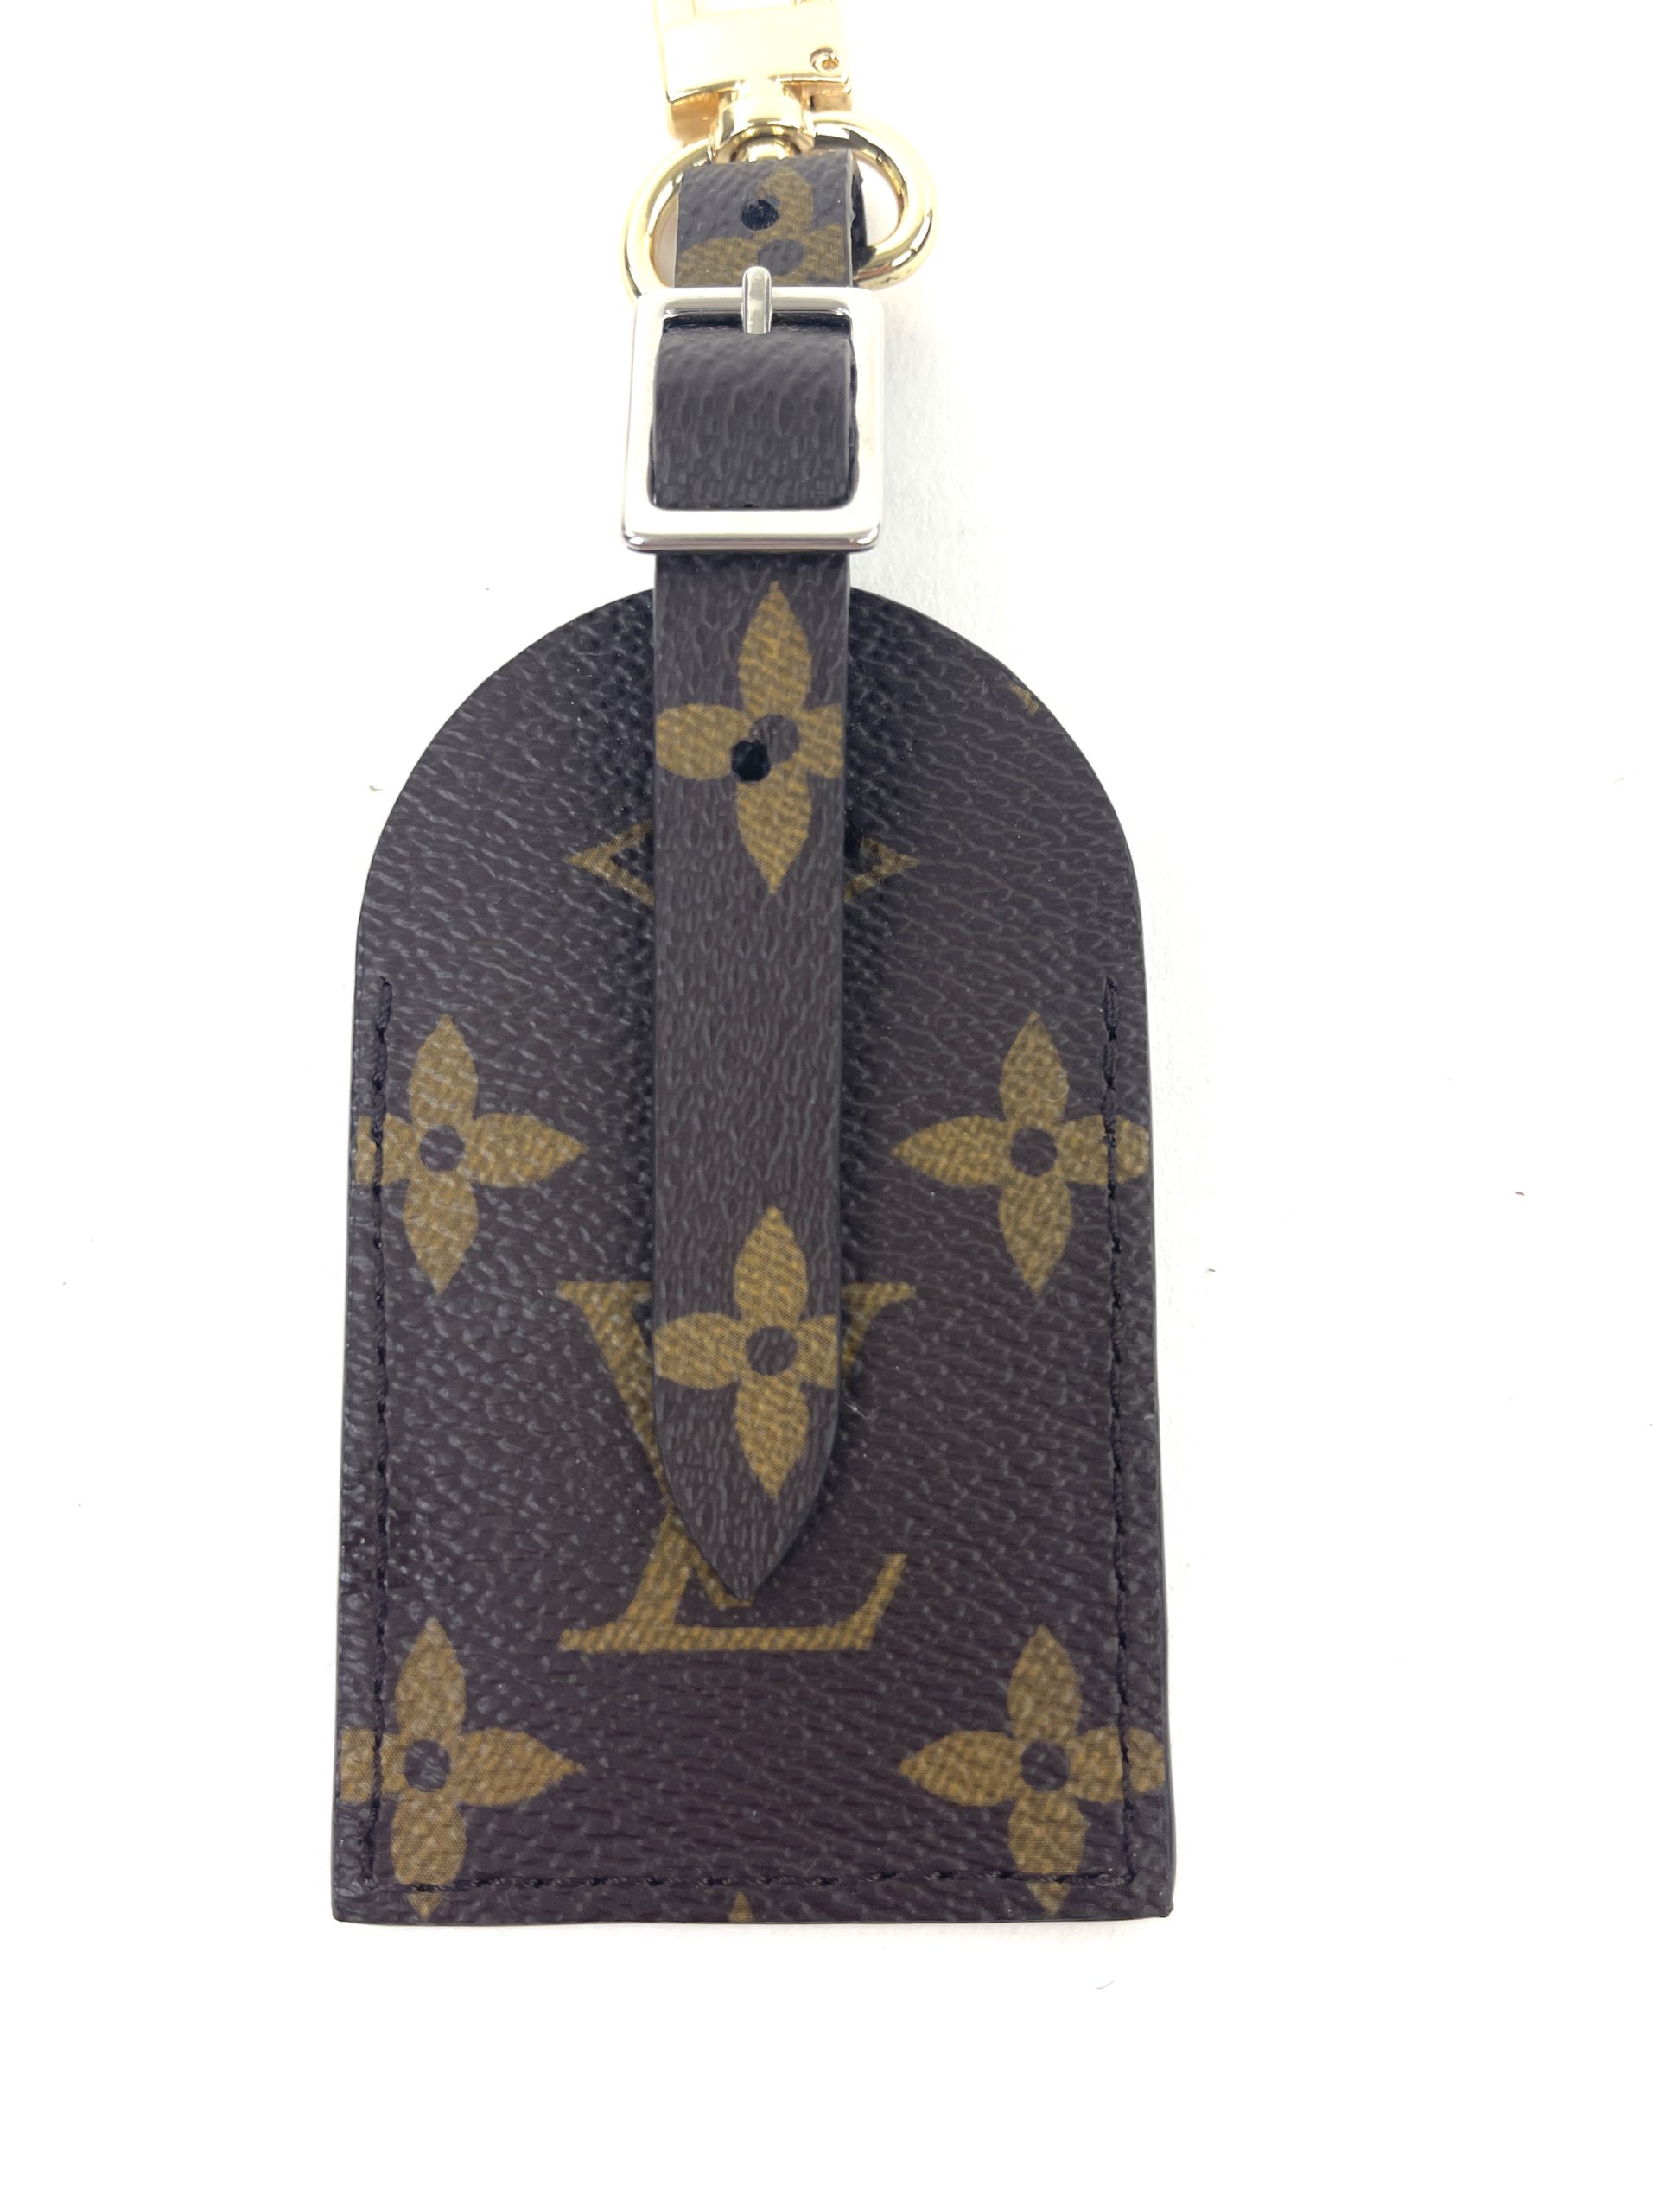 Louis Vuitton Luggage Tag for my Neverfull MM  Louis vuitton luggage tag, Louis  vuitton men, Louis vuitton